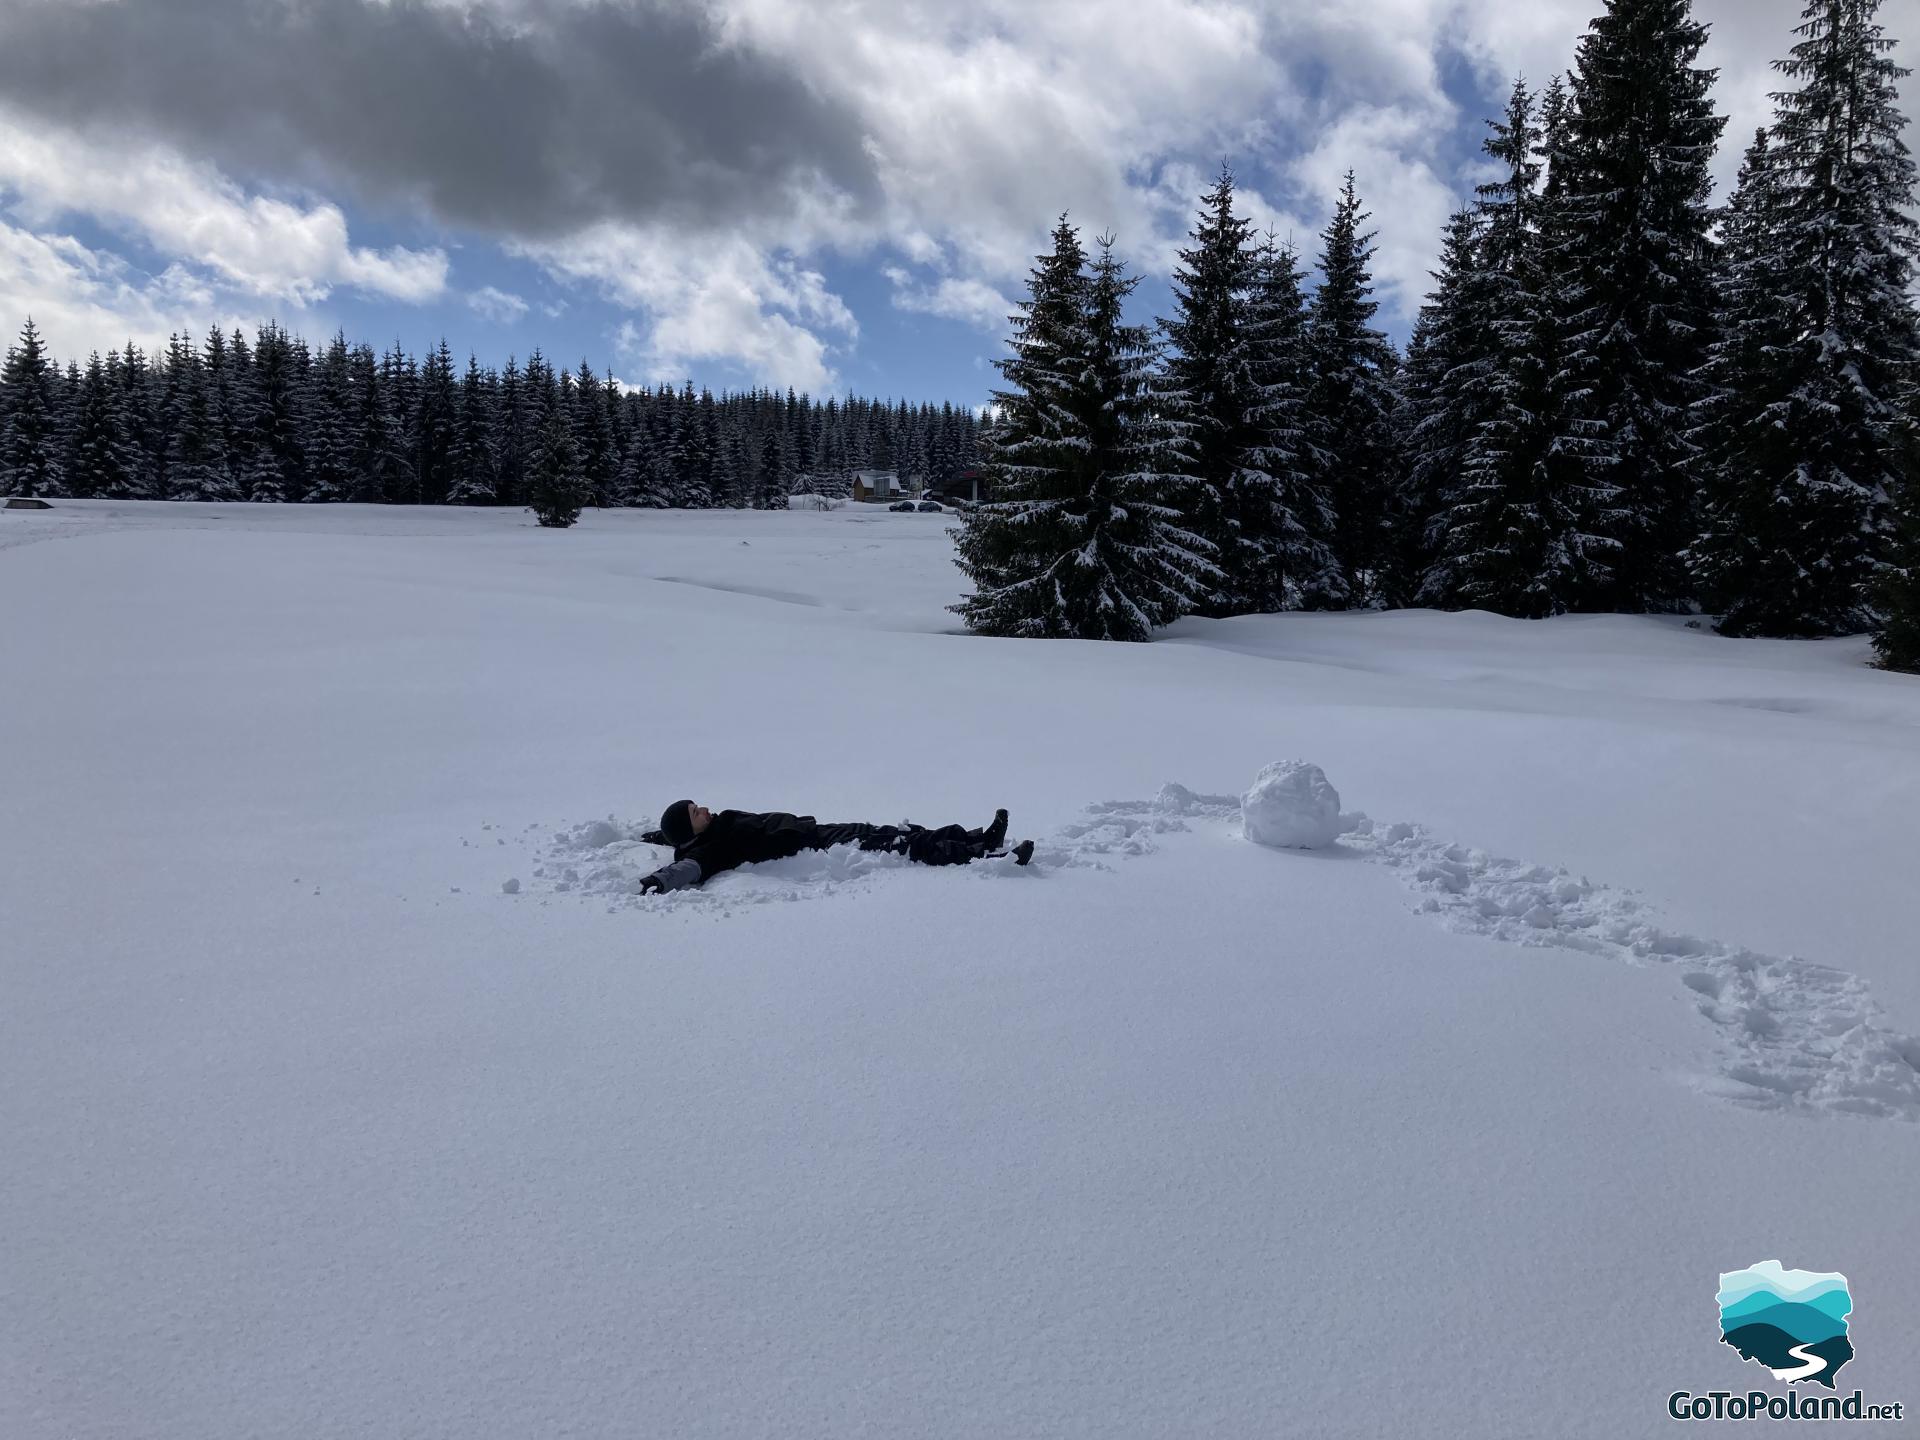 A man lying in the snow